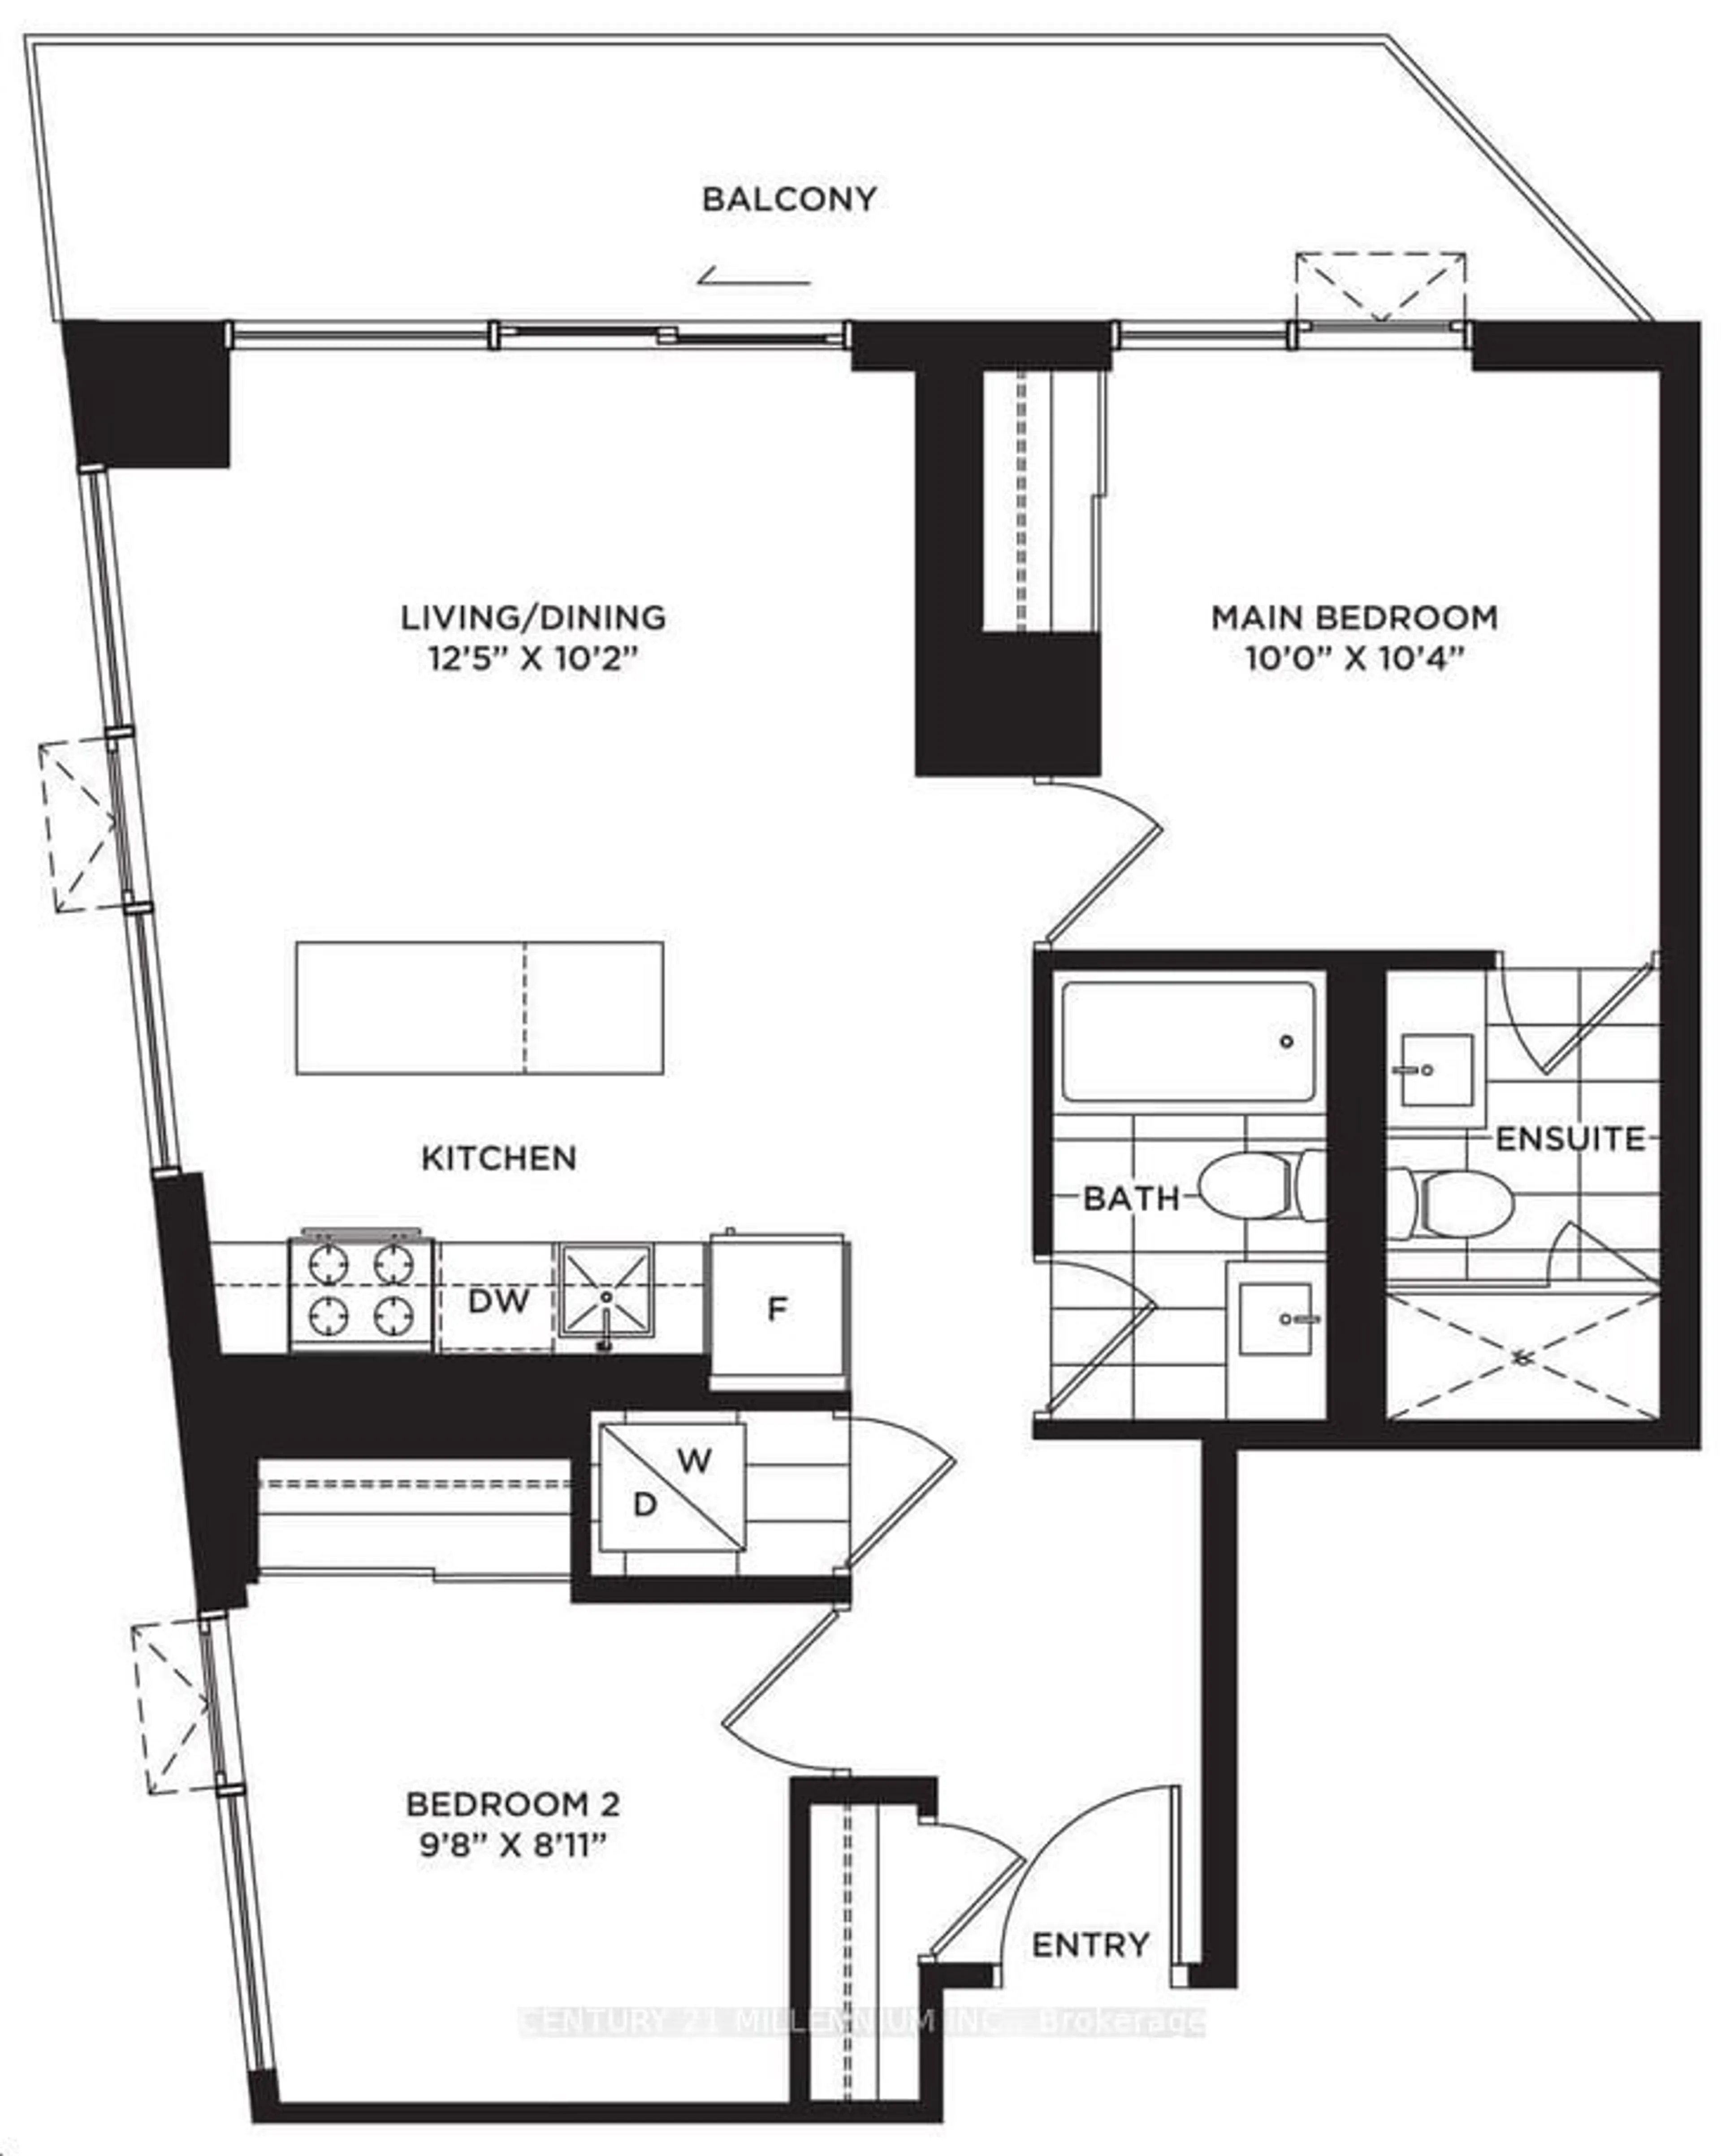 Floor plan for 4065 Confederation Pkwy #2204, Mississauga Ontario L5B 0L4